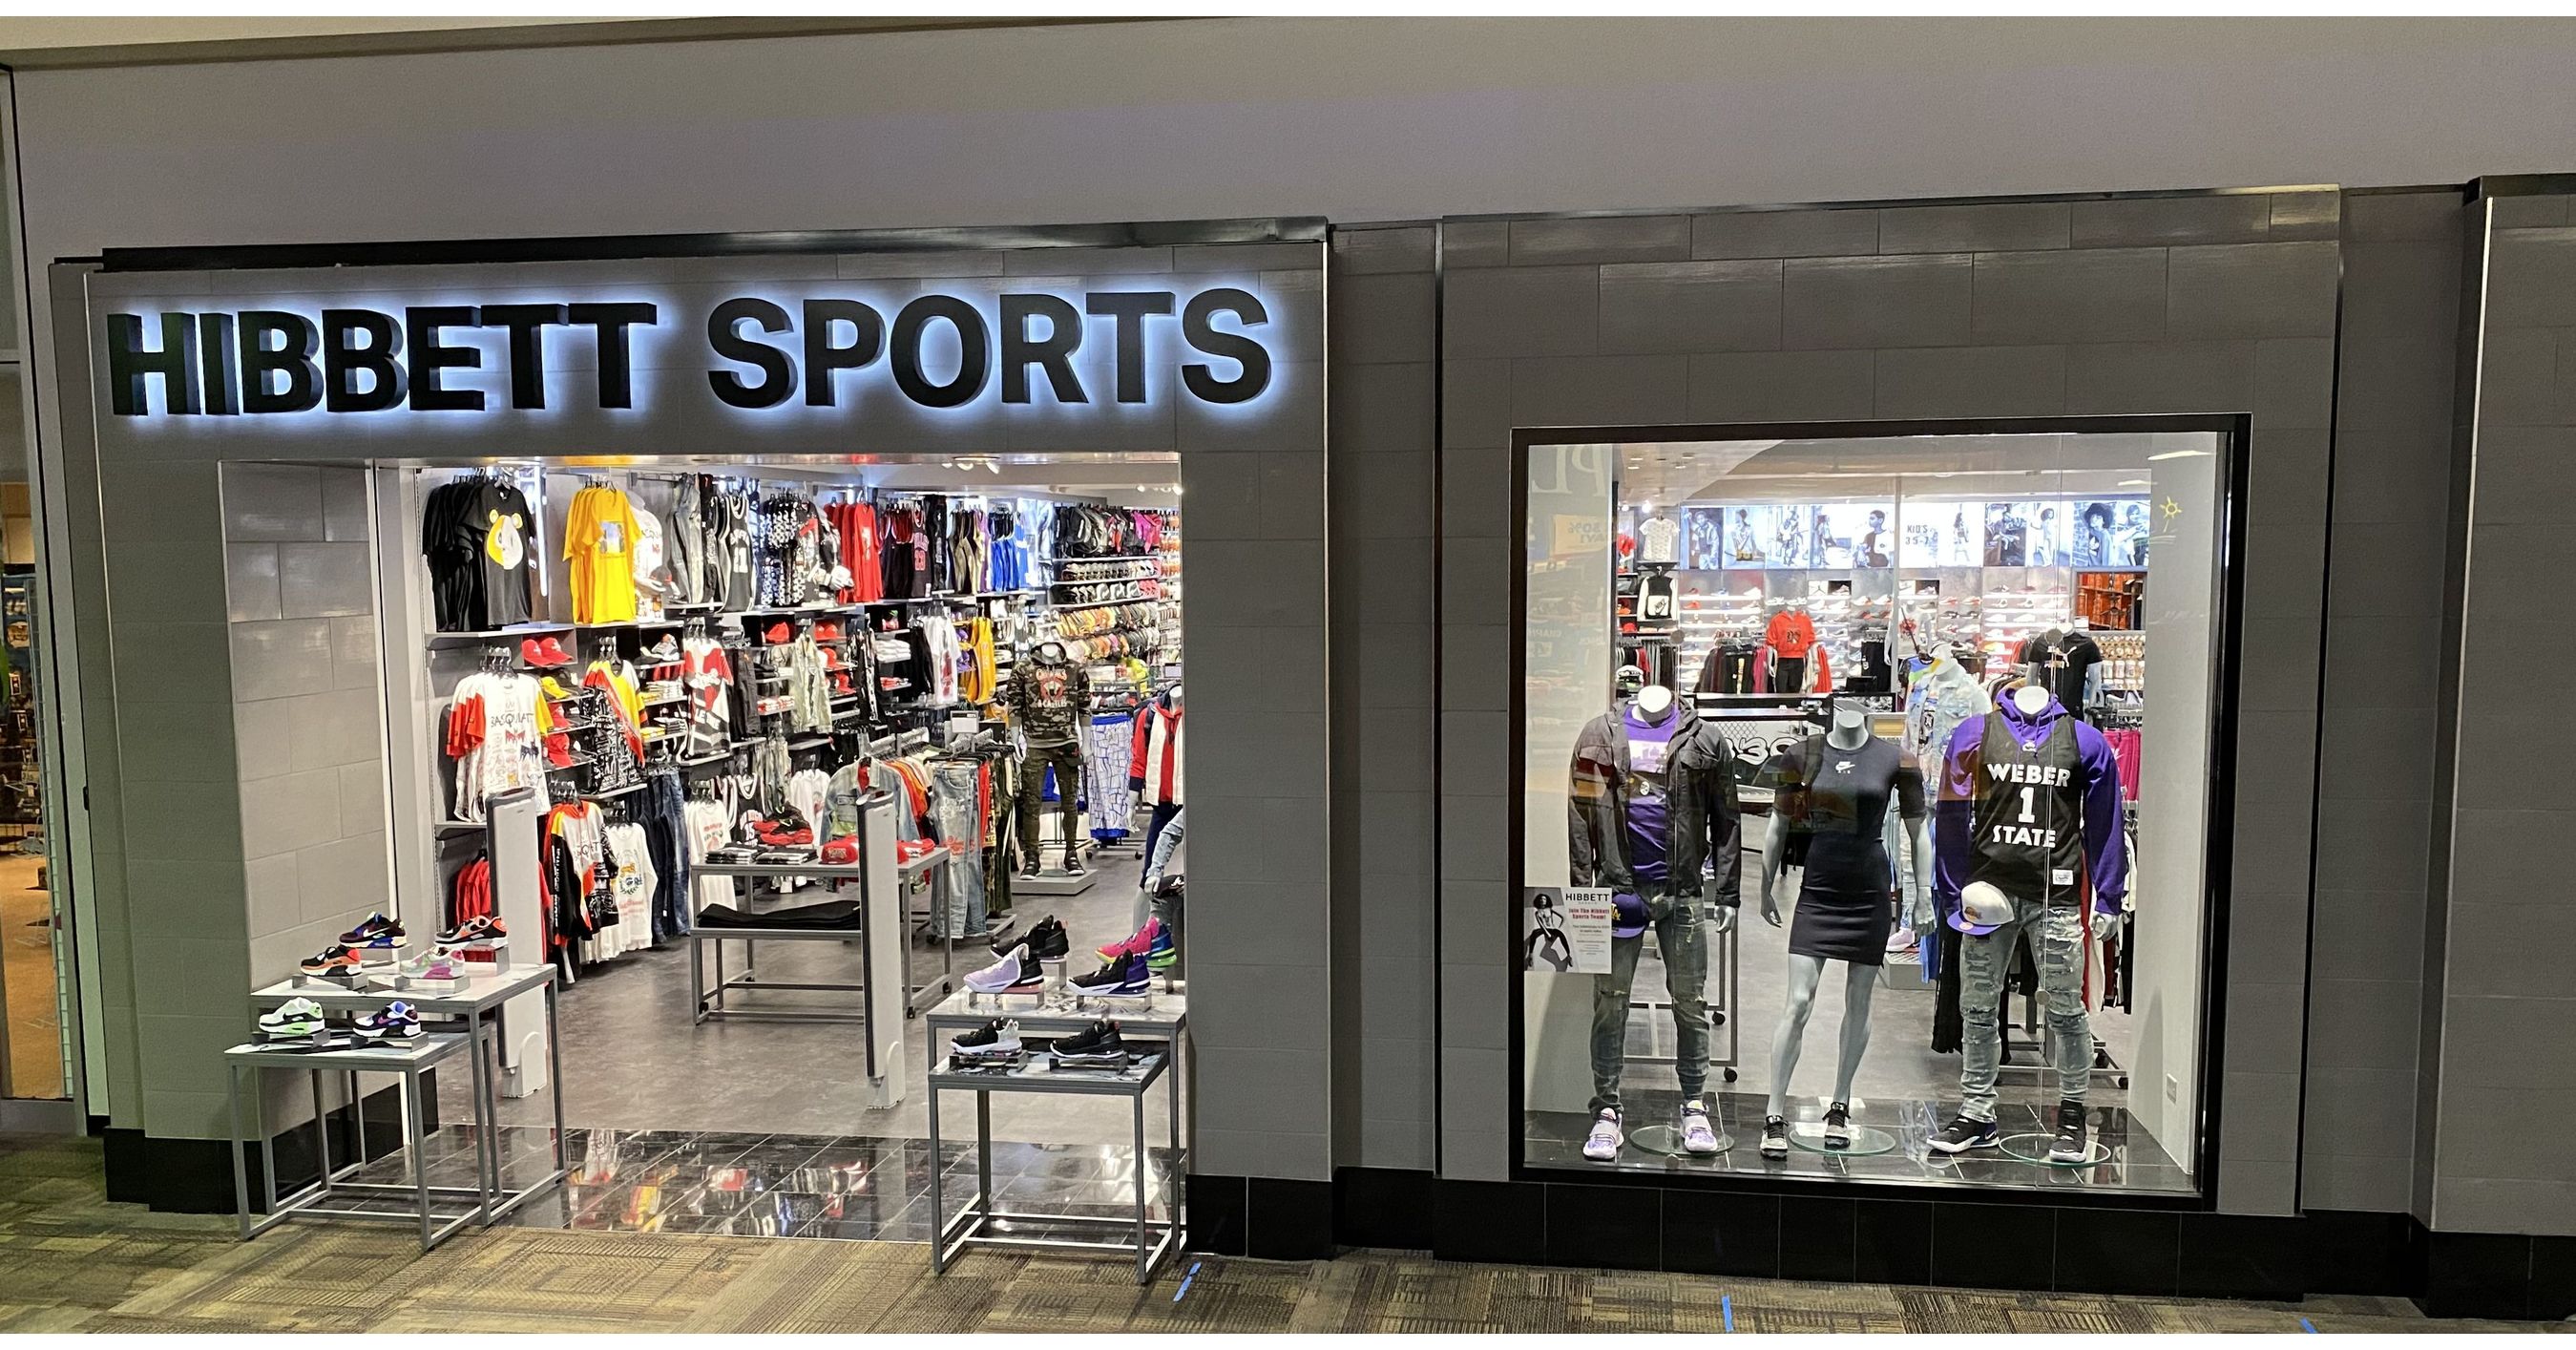 Hibbett Sports Begins March North With Opening at Dorchester